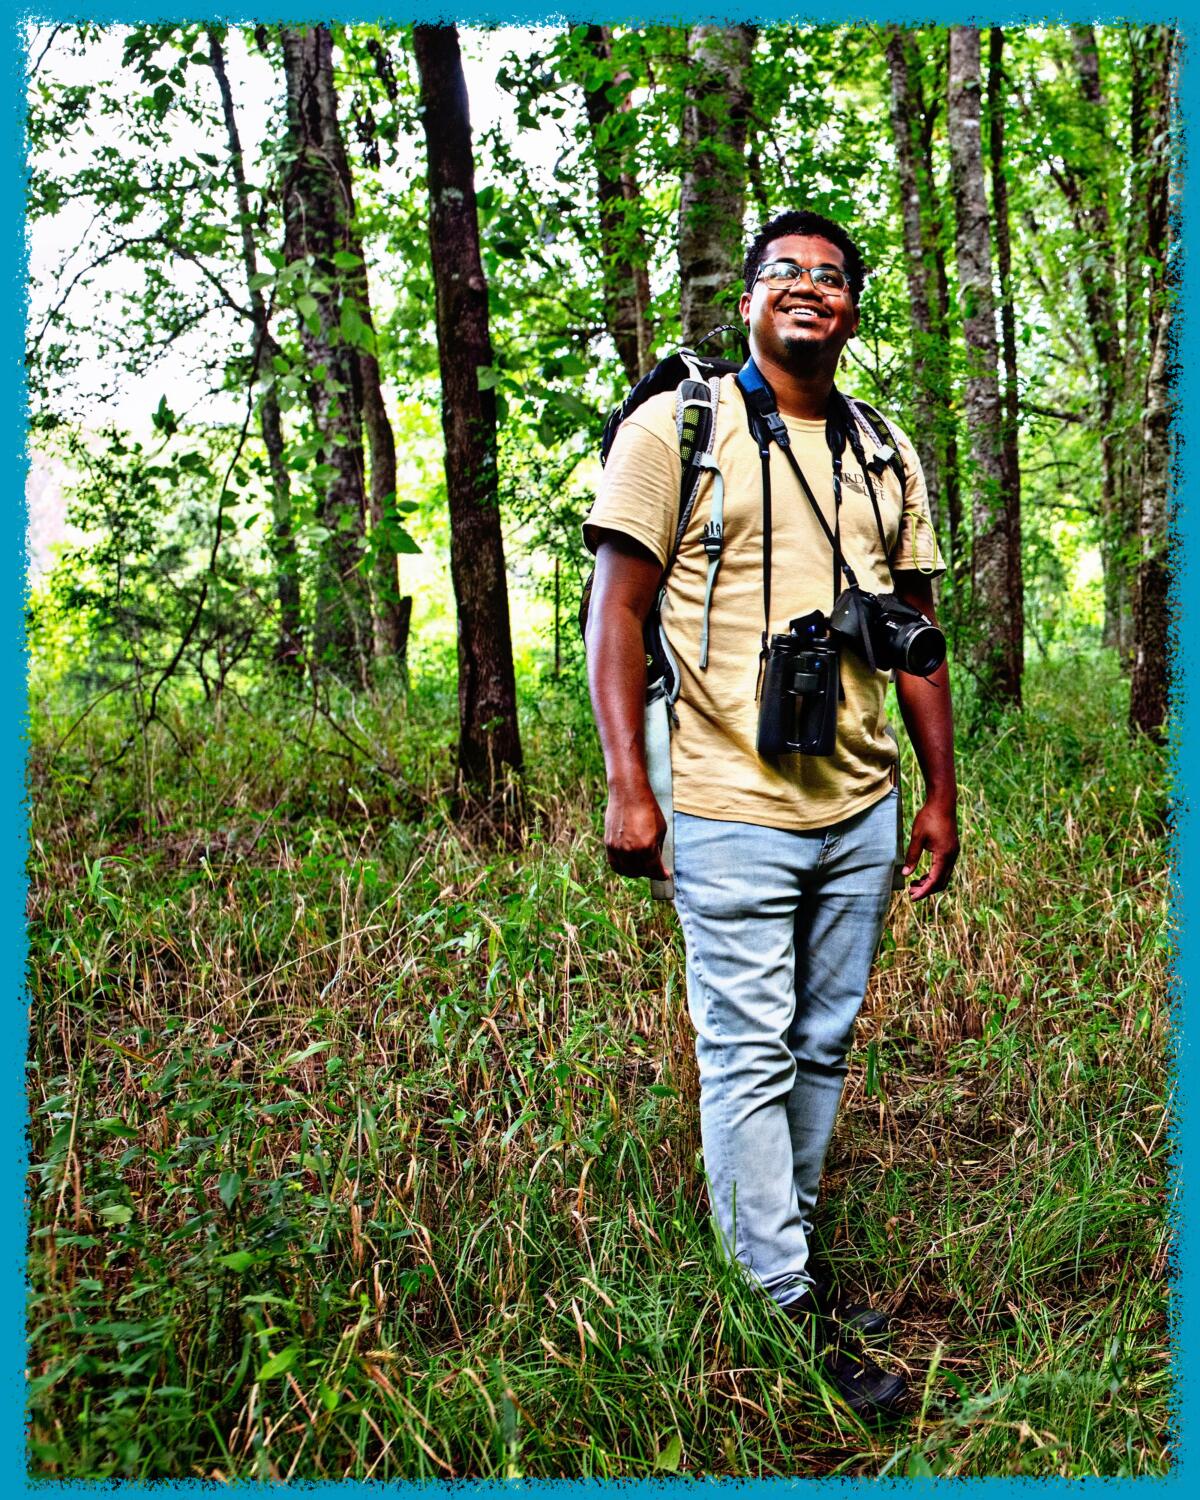 A man wearing a backpack, with a camera and binoculars slung around his neck, stands amid trees.